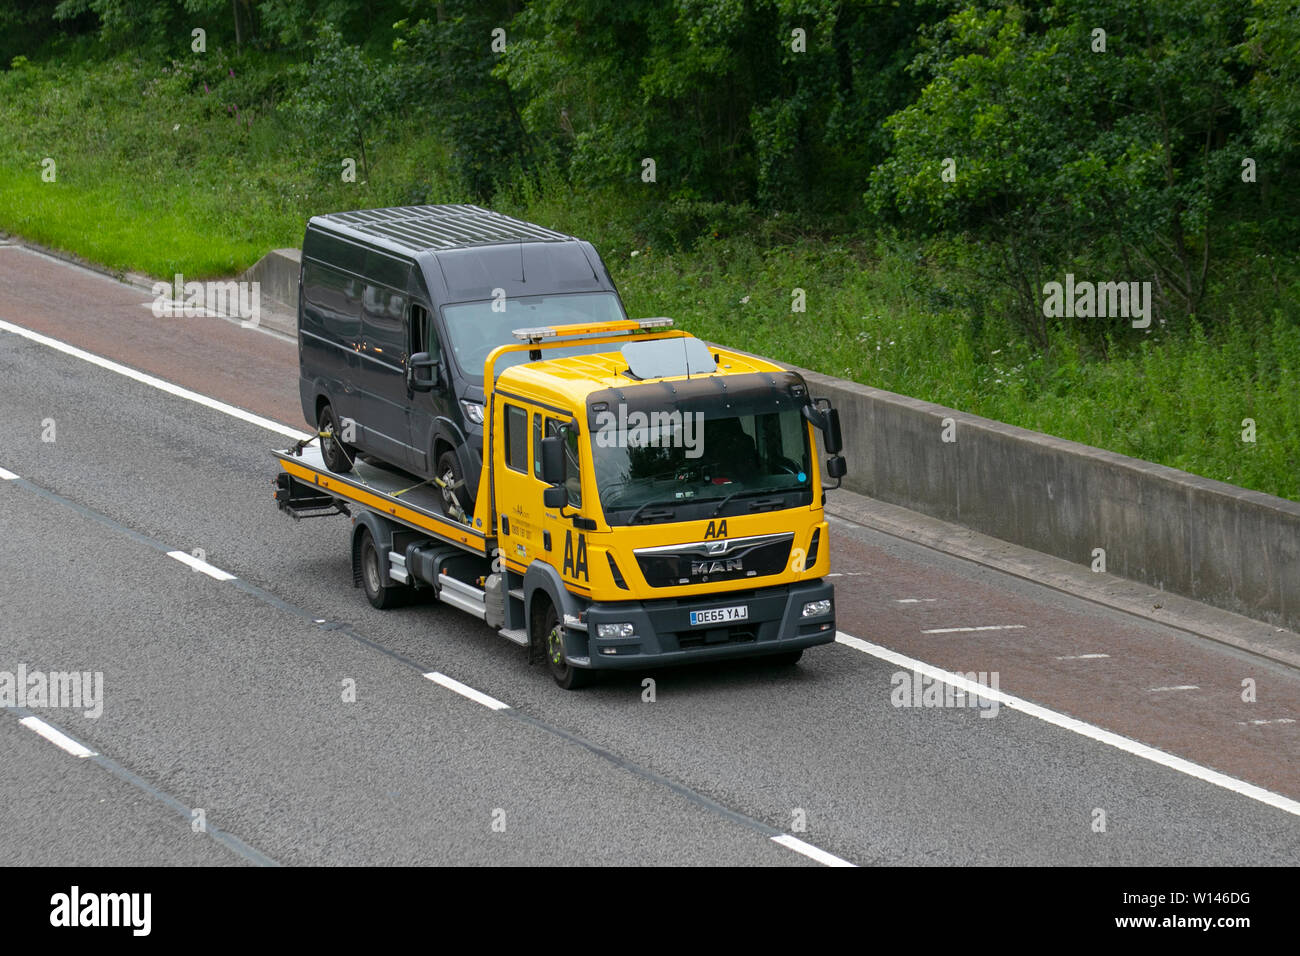 AA Van recovery truck carrying broken down van; Side view of rescue breakdown recovery lorry truck transporter transporting unmarked black van driving along  M6, Lancaster, UK; Vehicular traffic, transport, modern, north-bound on the 3 lane highway. Stock Photo